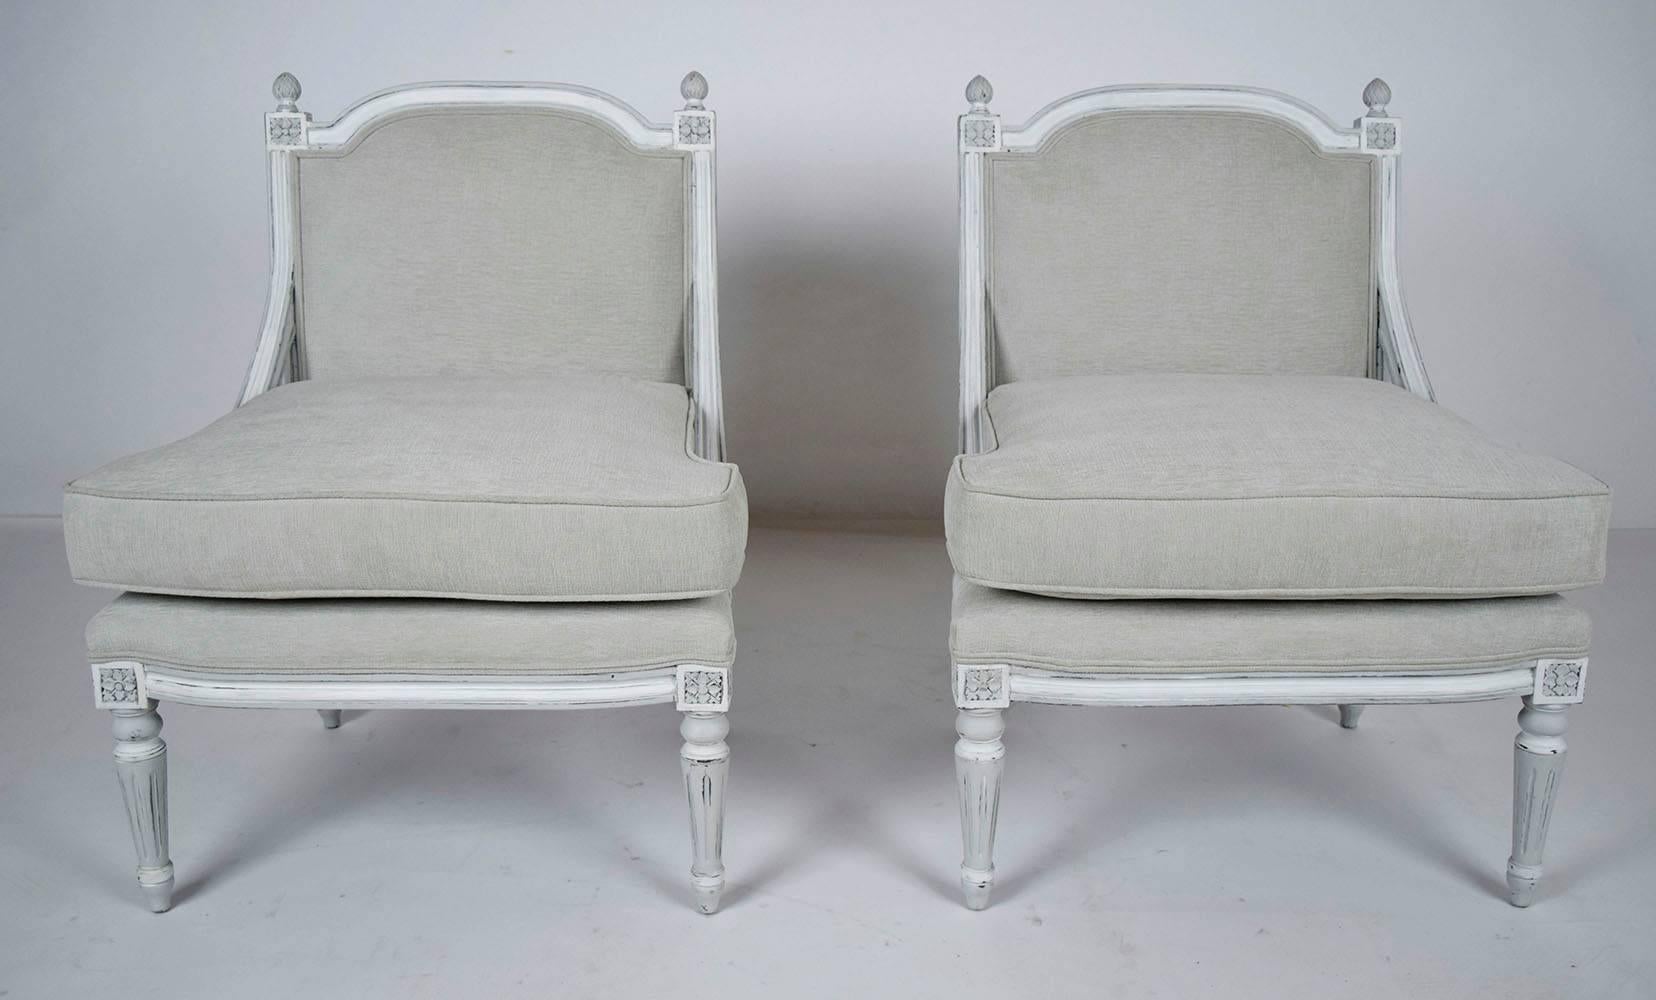 This pair of French Louis XVI-style bergeres features a walnut frame that has been painted in a grey and oyster color combination with a beautiful distressed finish. The frame is adorned with delicate carved moulding details with rosette details in